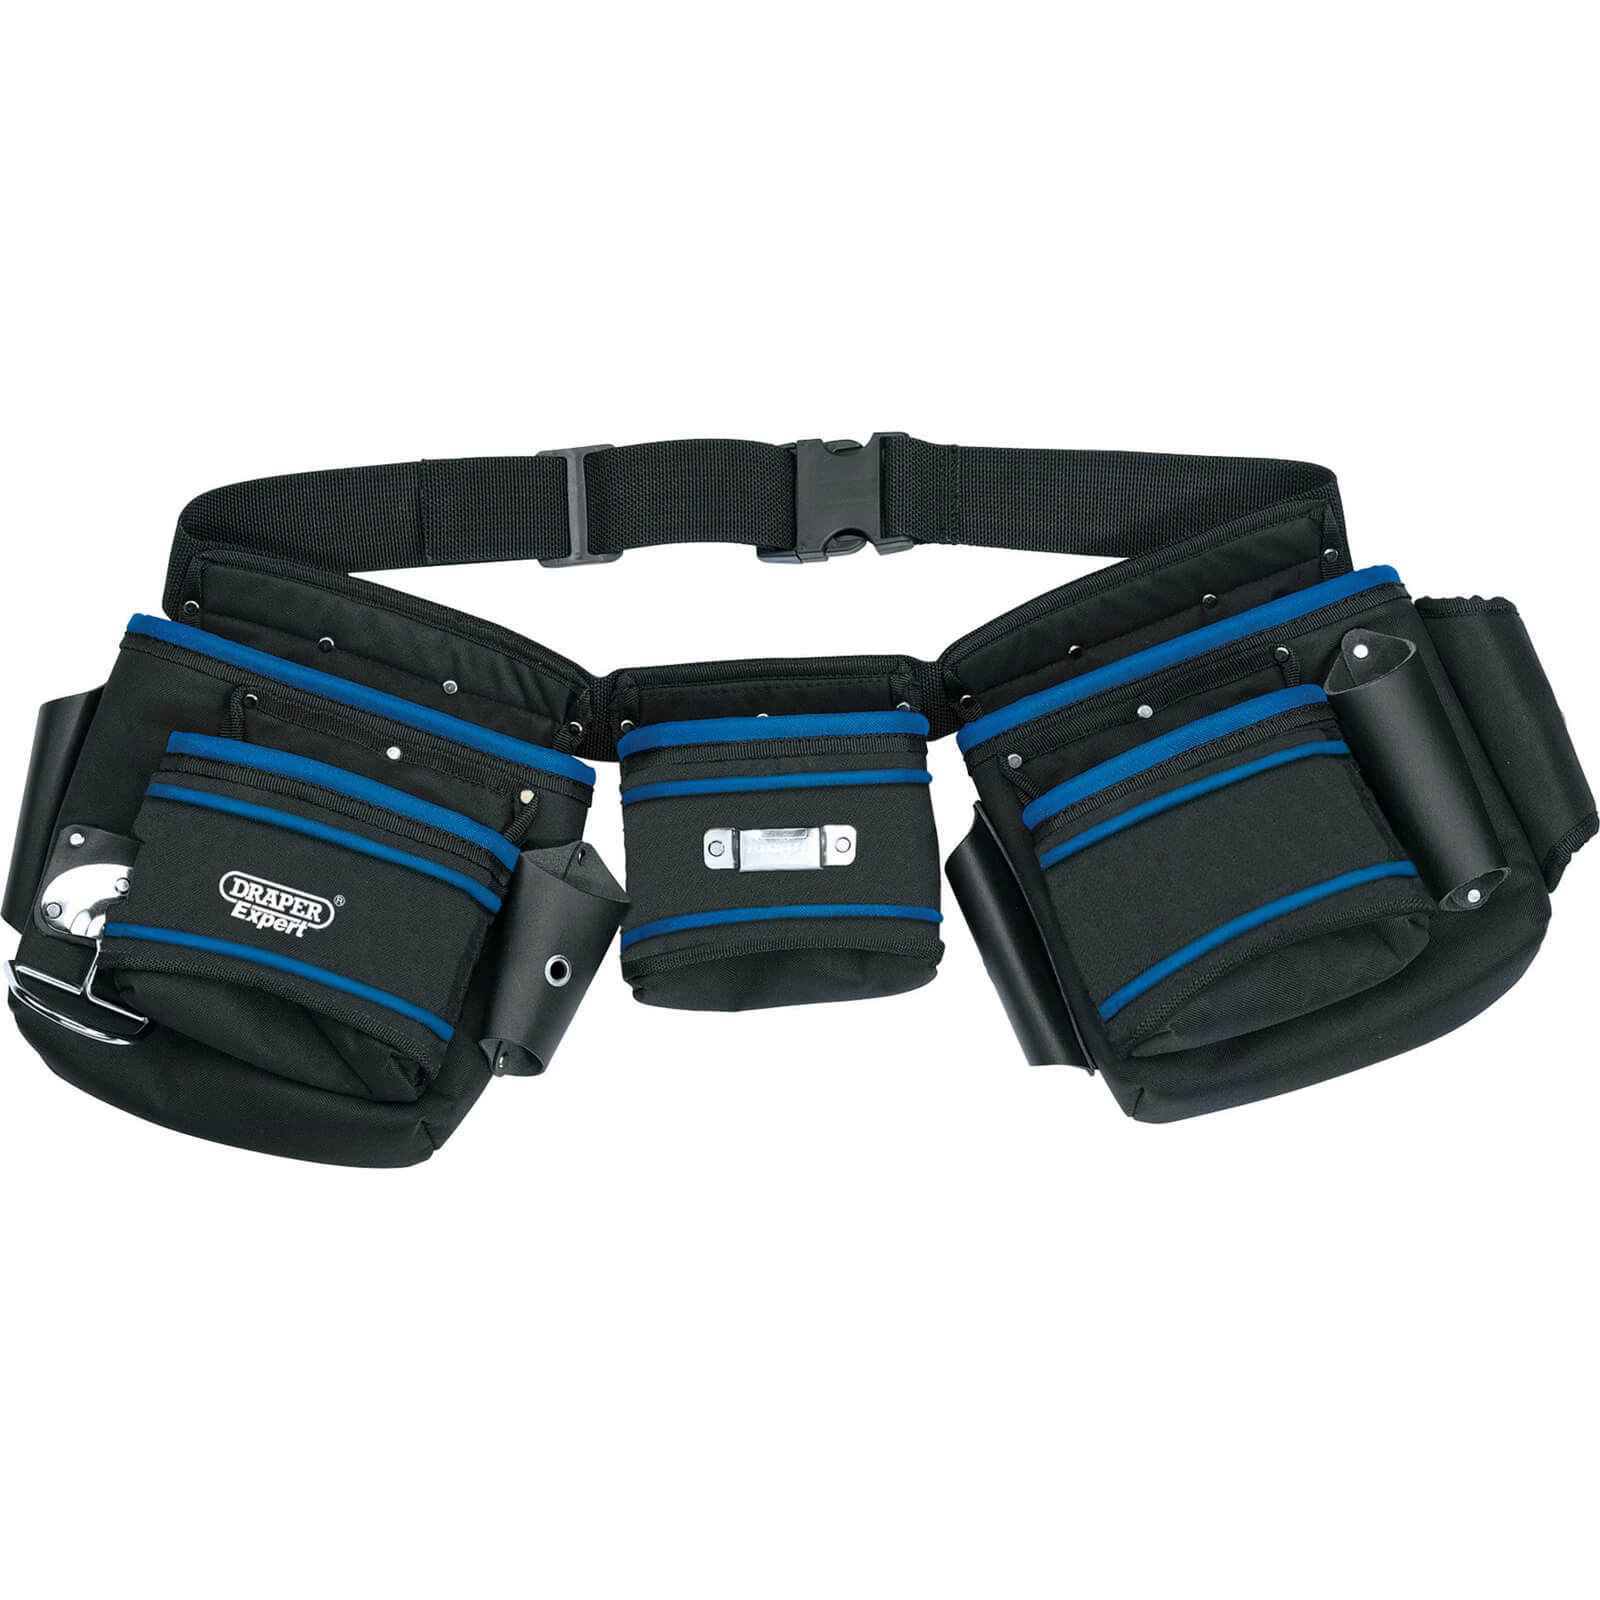 Image of Draper Expert Heavy Duty Nylon Double Tool Pouch with Belt